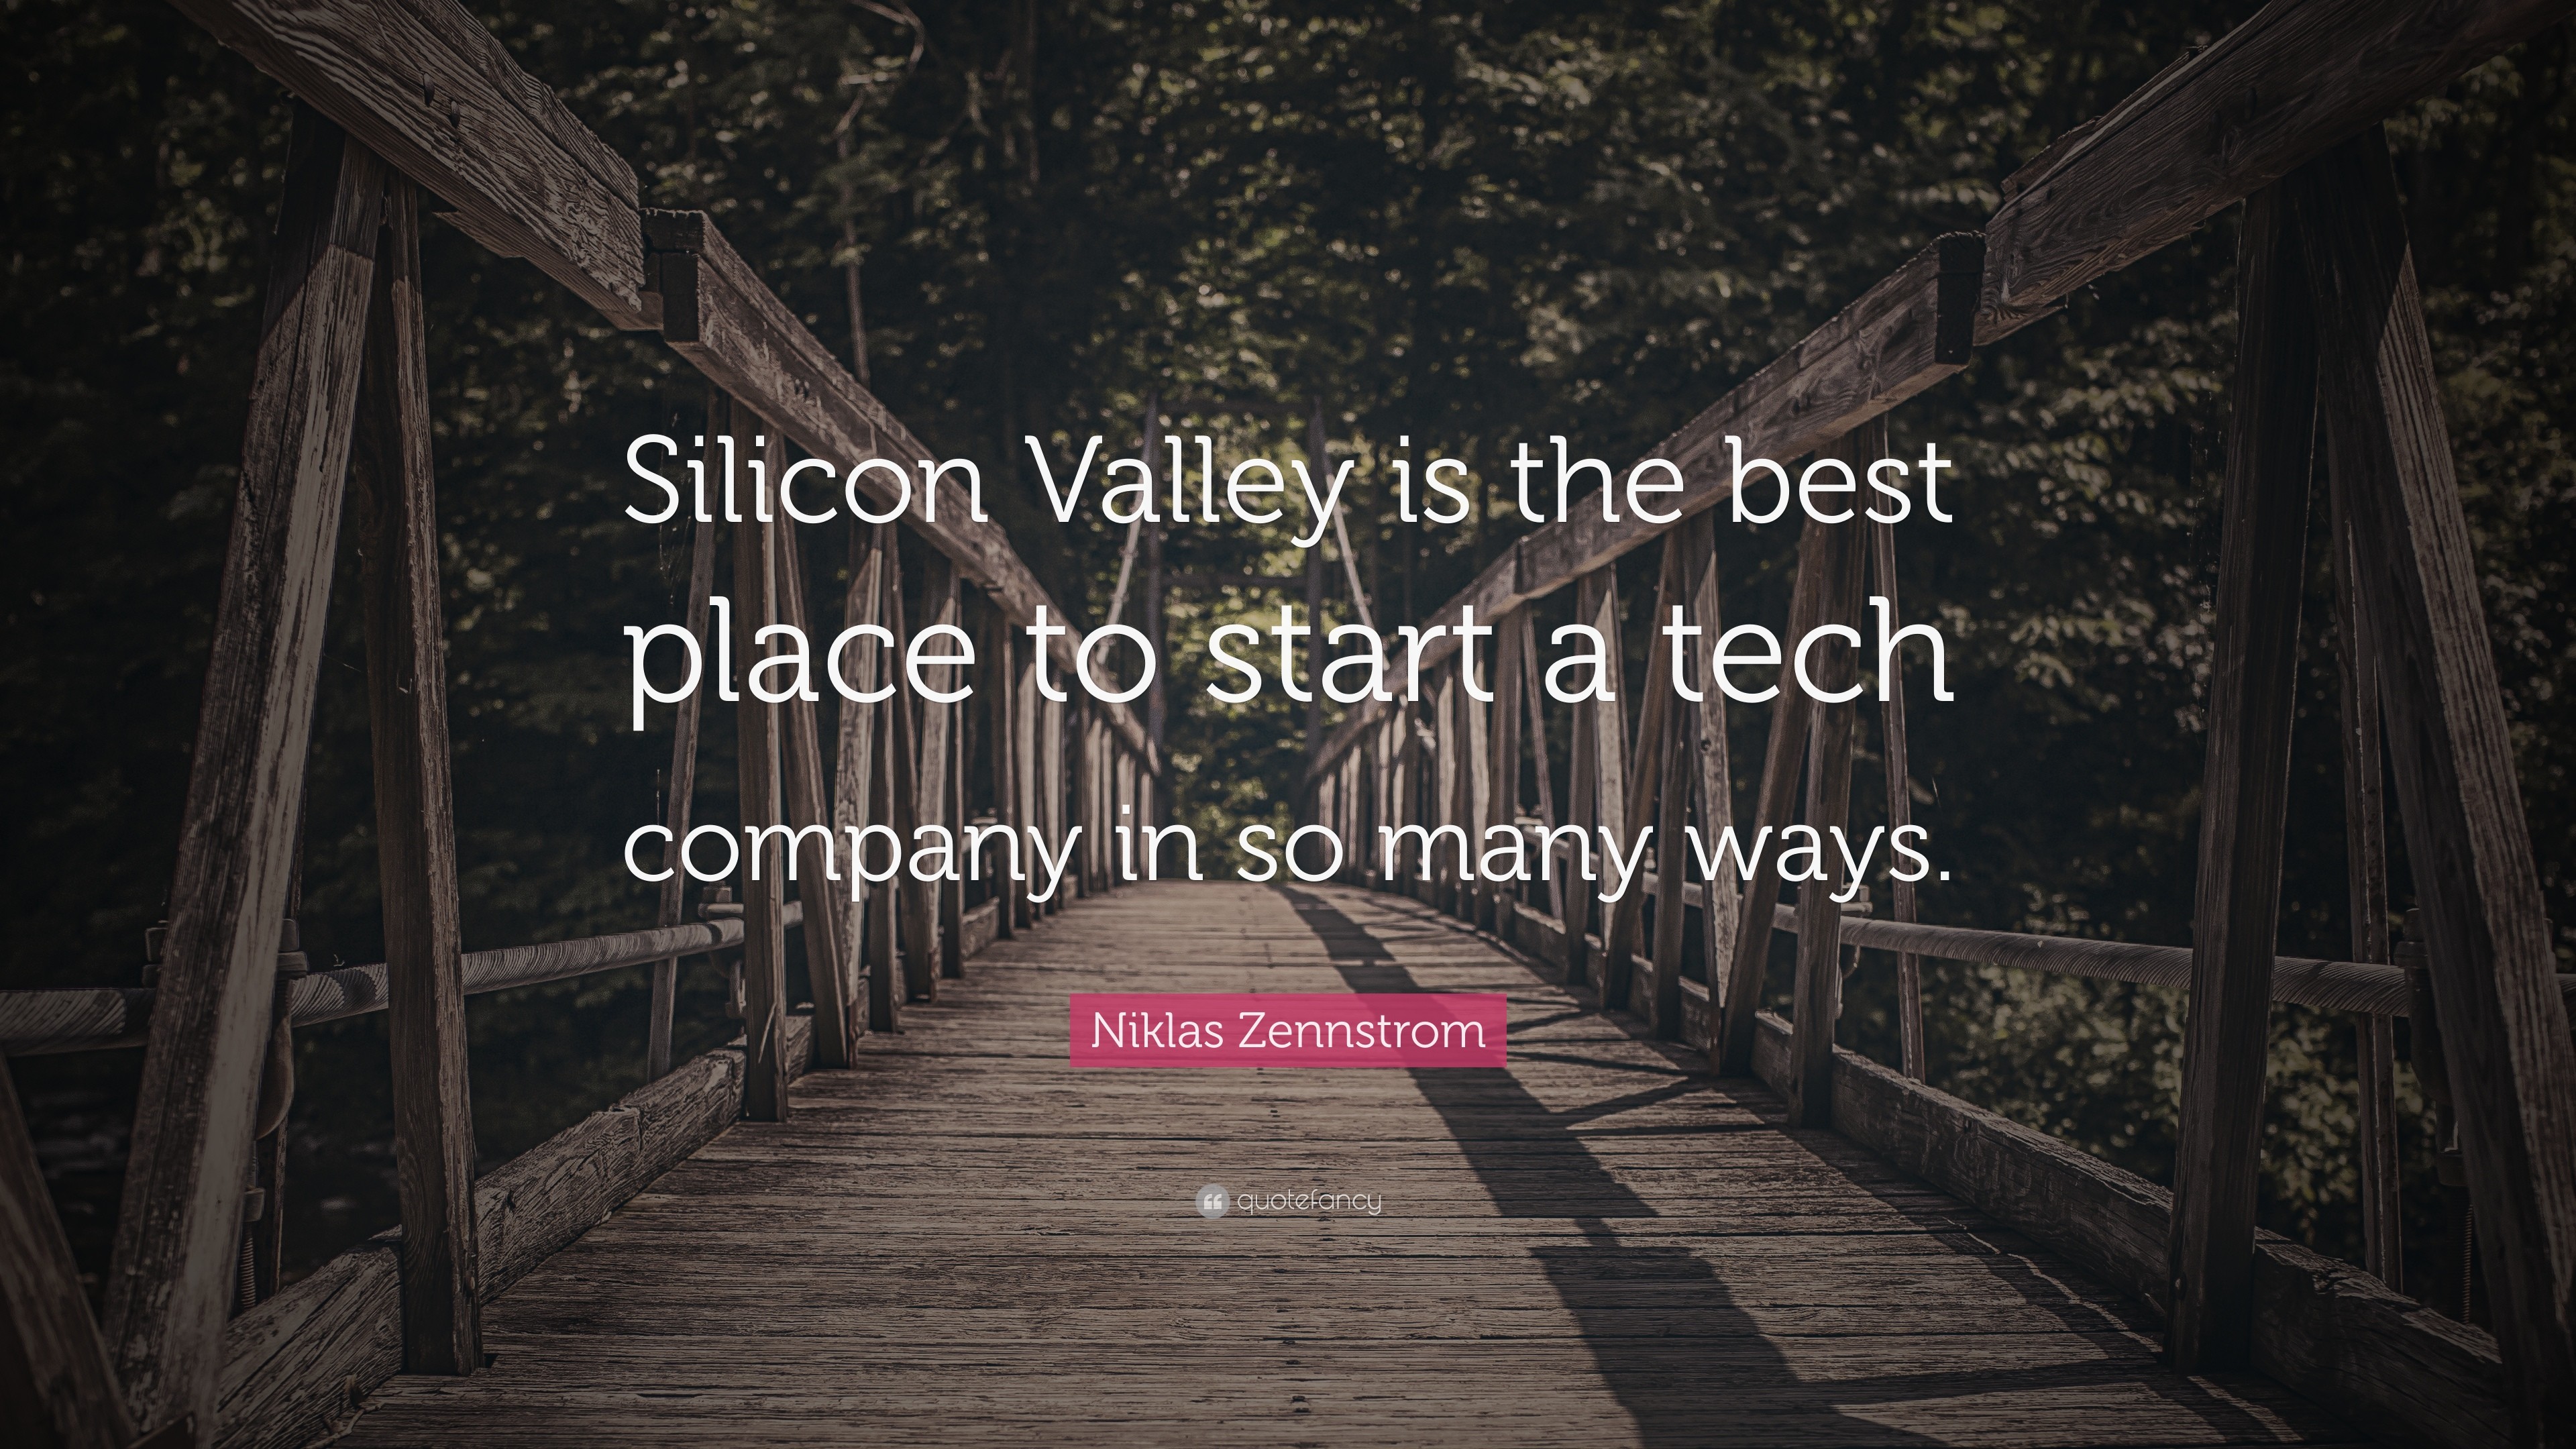 3840x2160 Niklas Zennstrom Quote: “Silicon Valley is the best place to start a tech  company